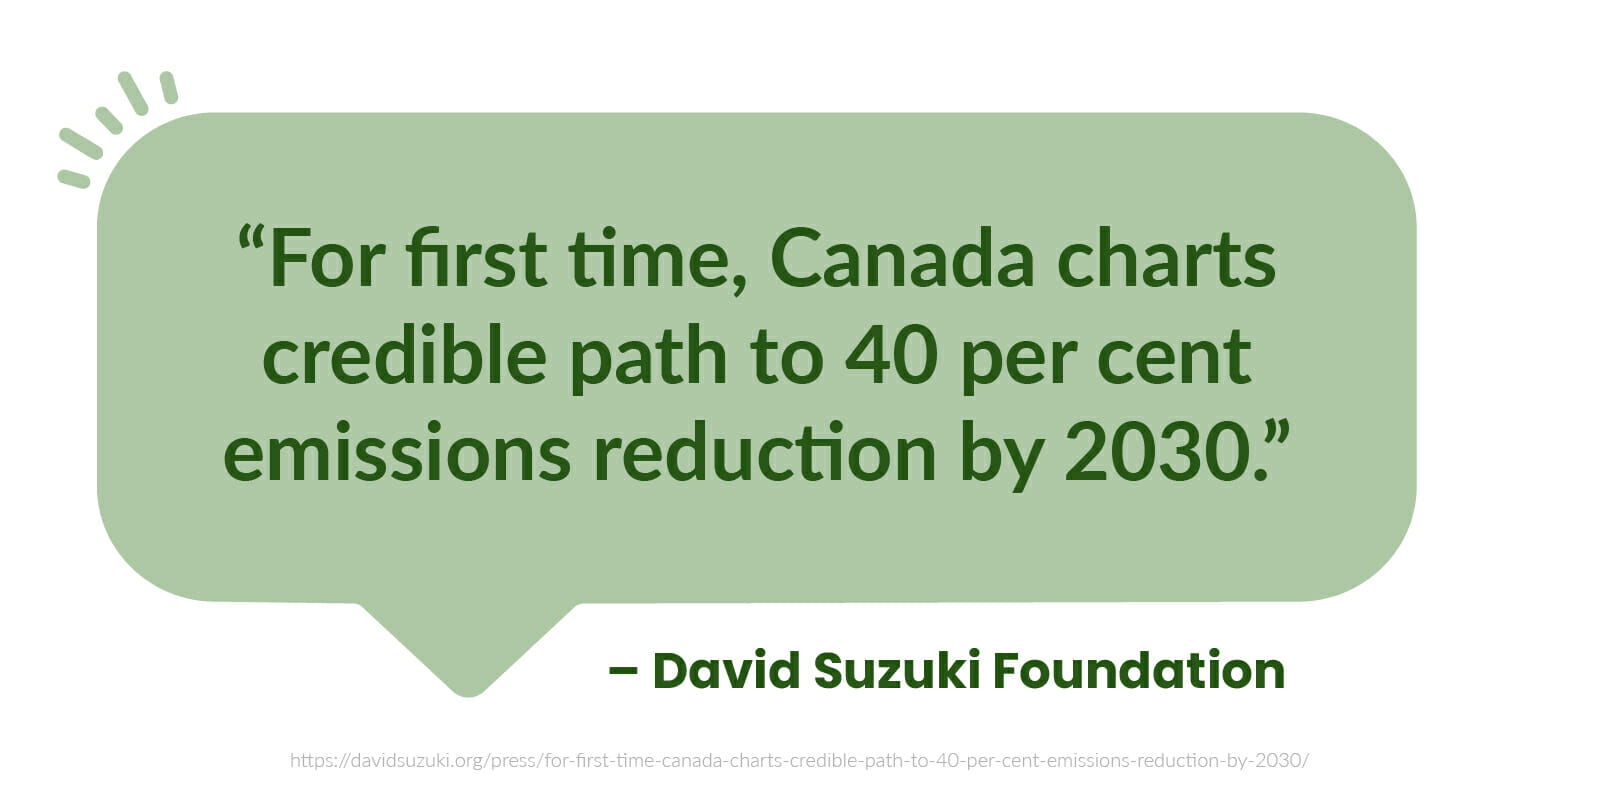  “For first time, Canada charts credible path to 40 per cent emissions reduction by 2030.” - David Suzuki Foundation